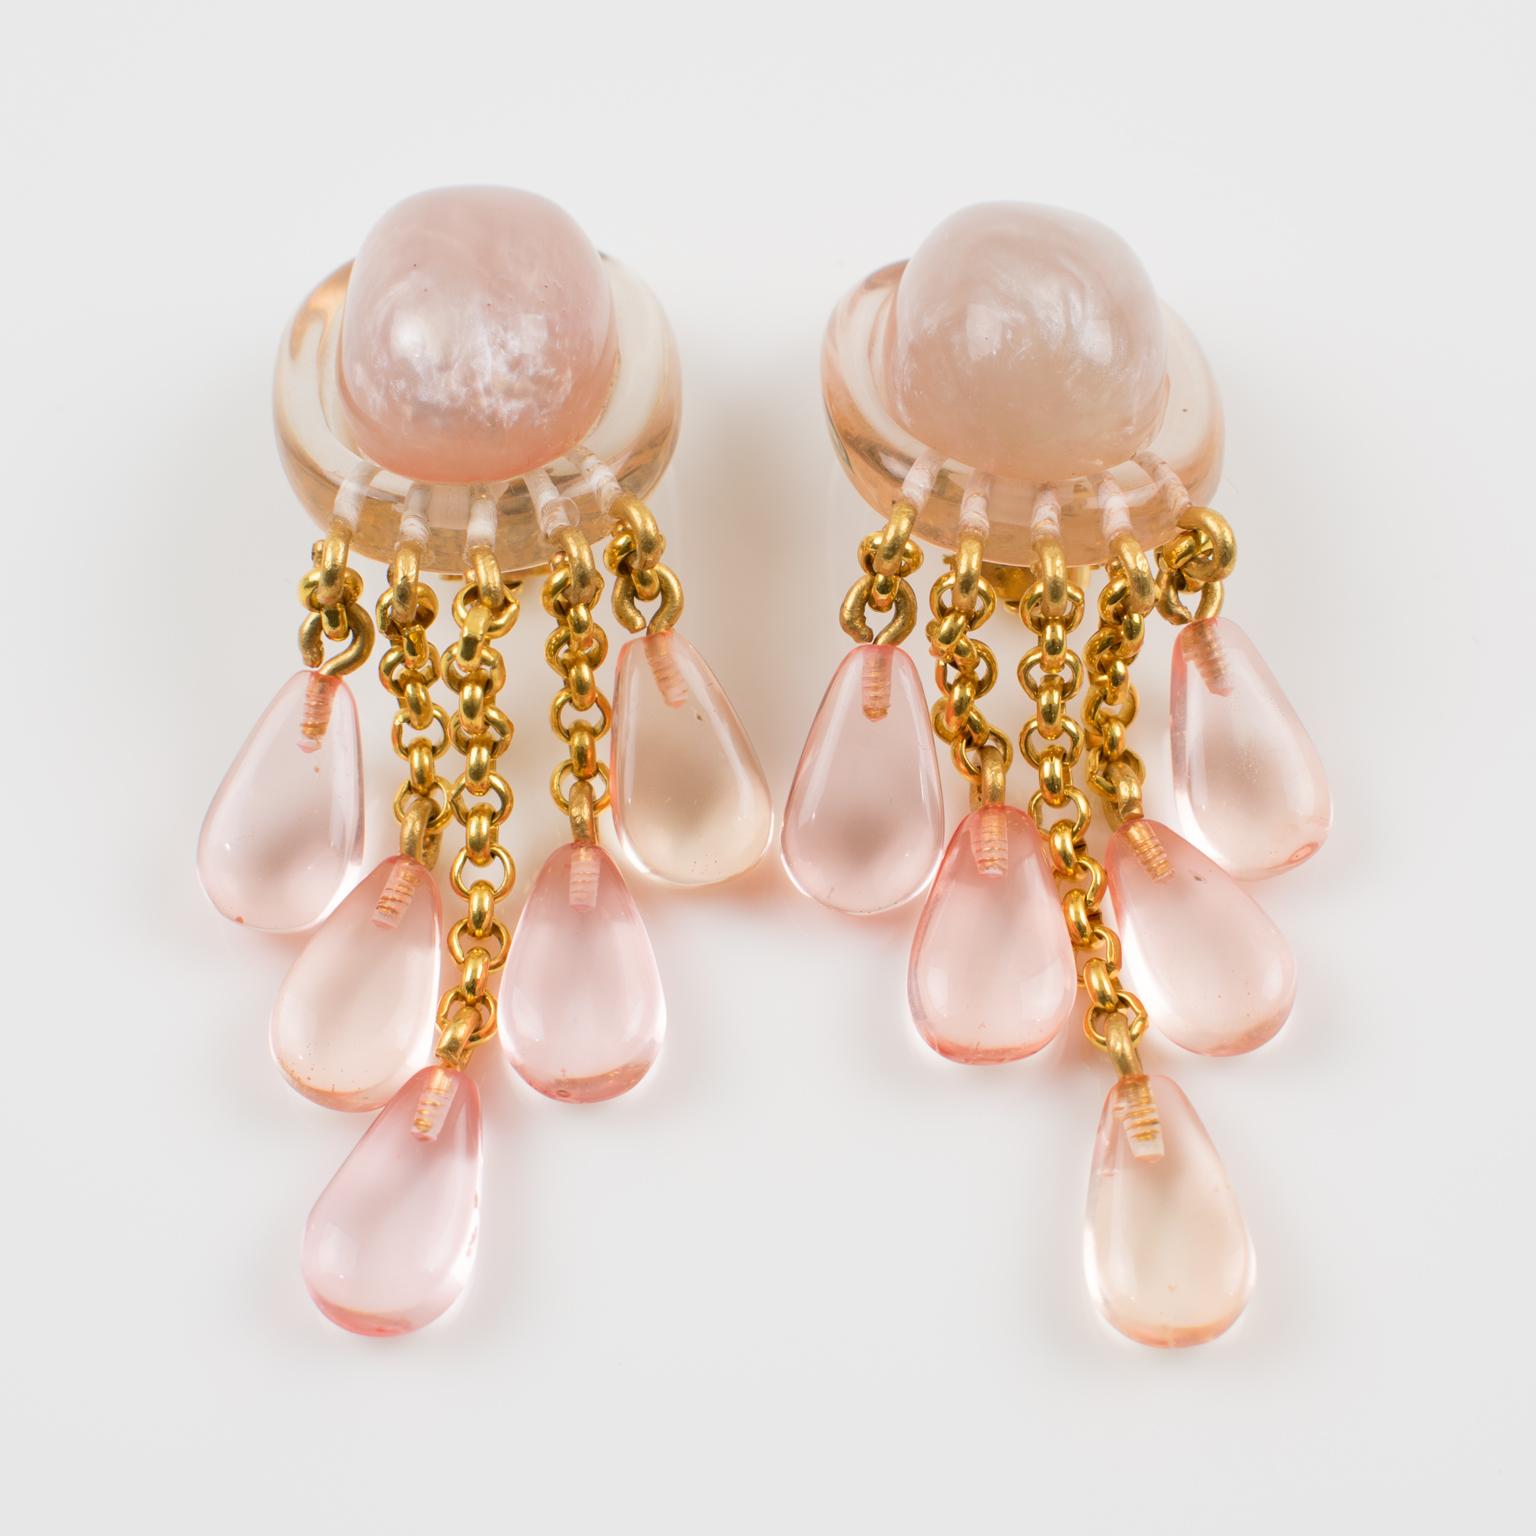 Modern Dominique Denaive Paris Signed Pearlized Pink Resin Dangling Clip on Earrings